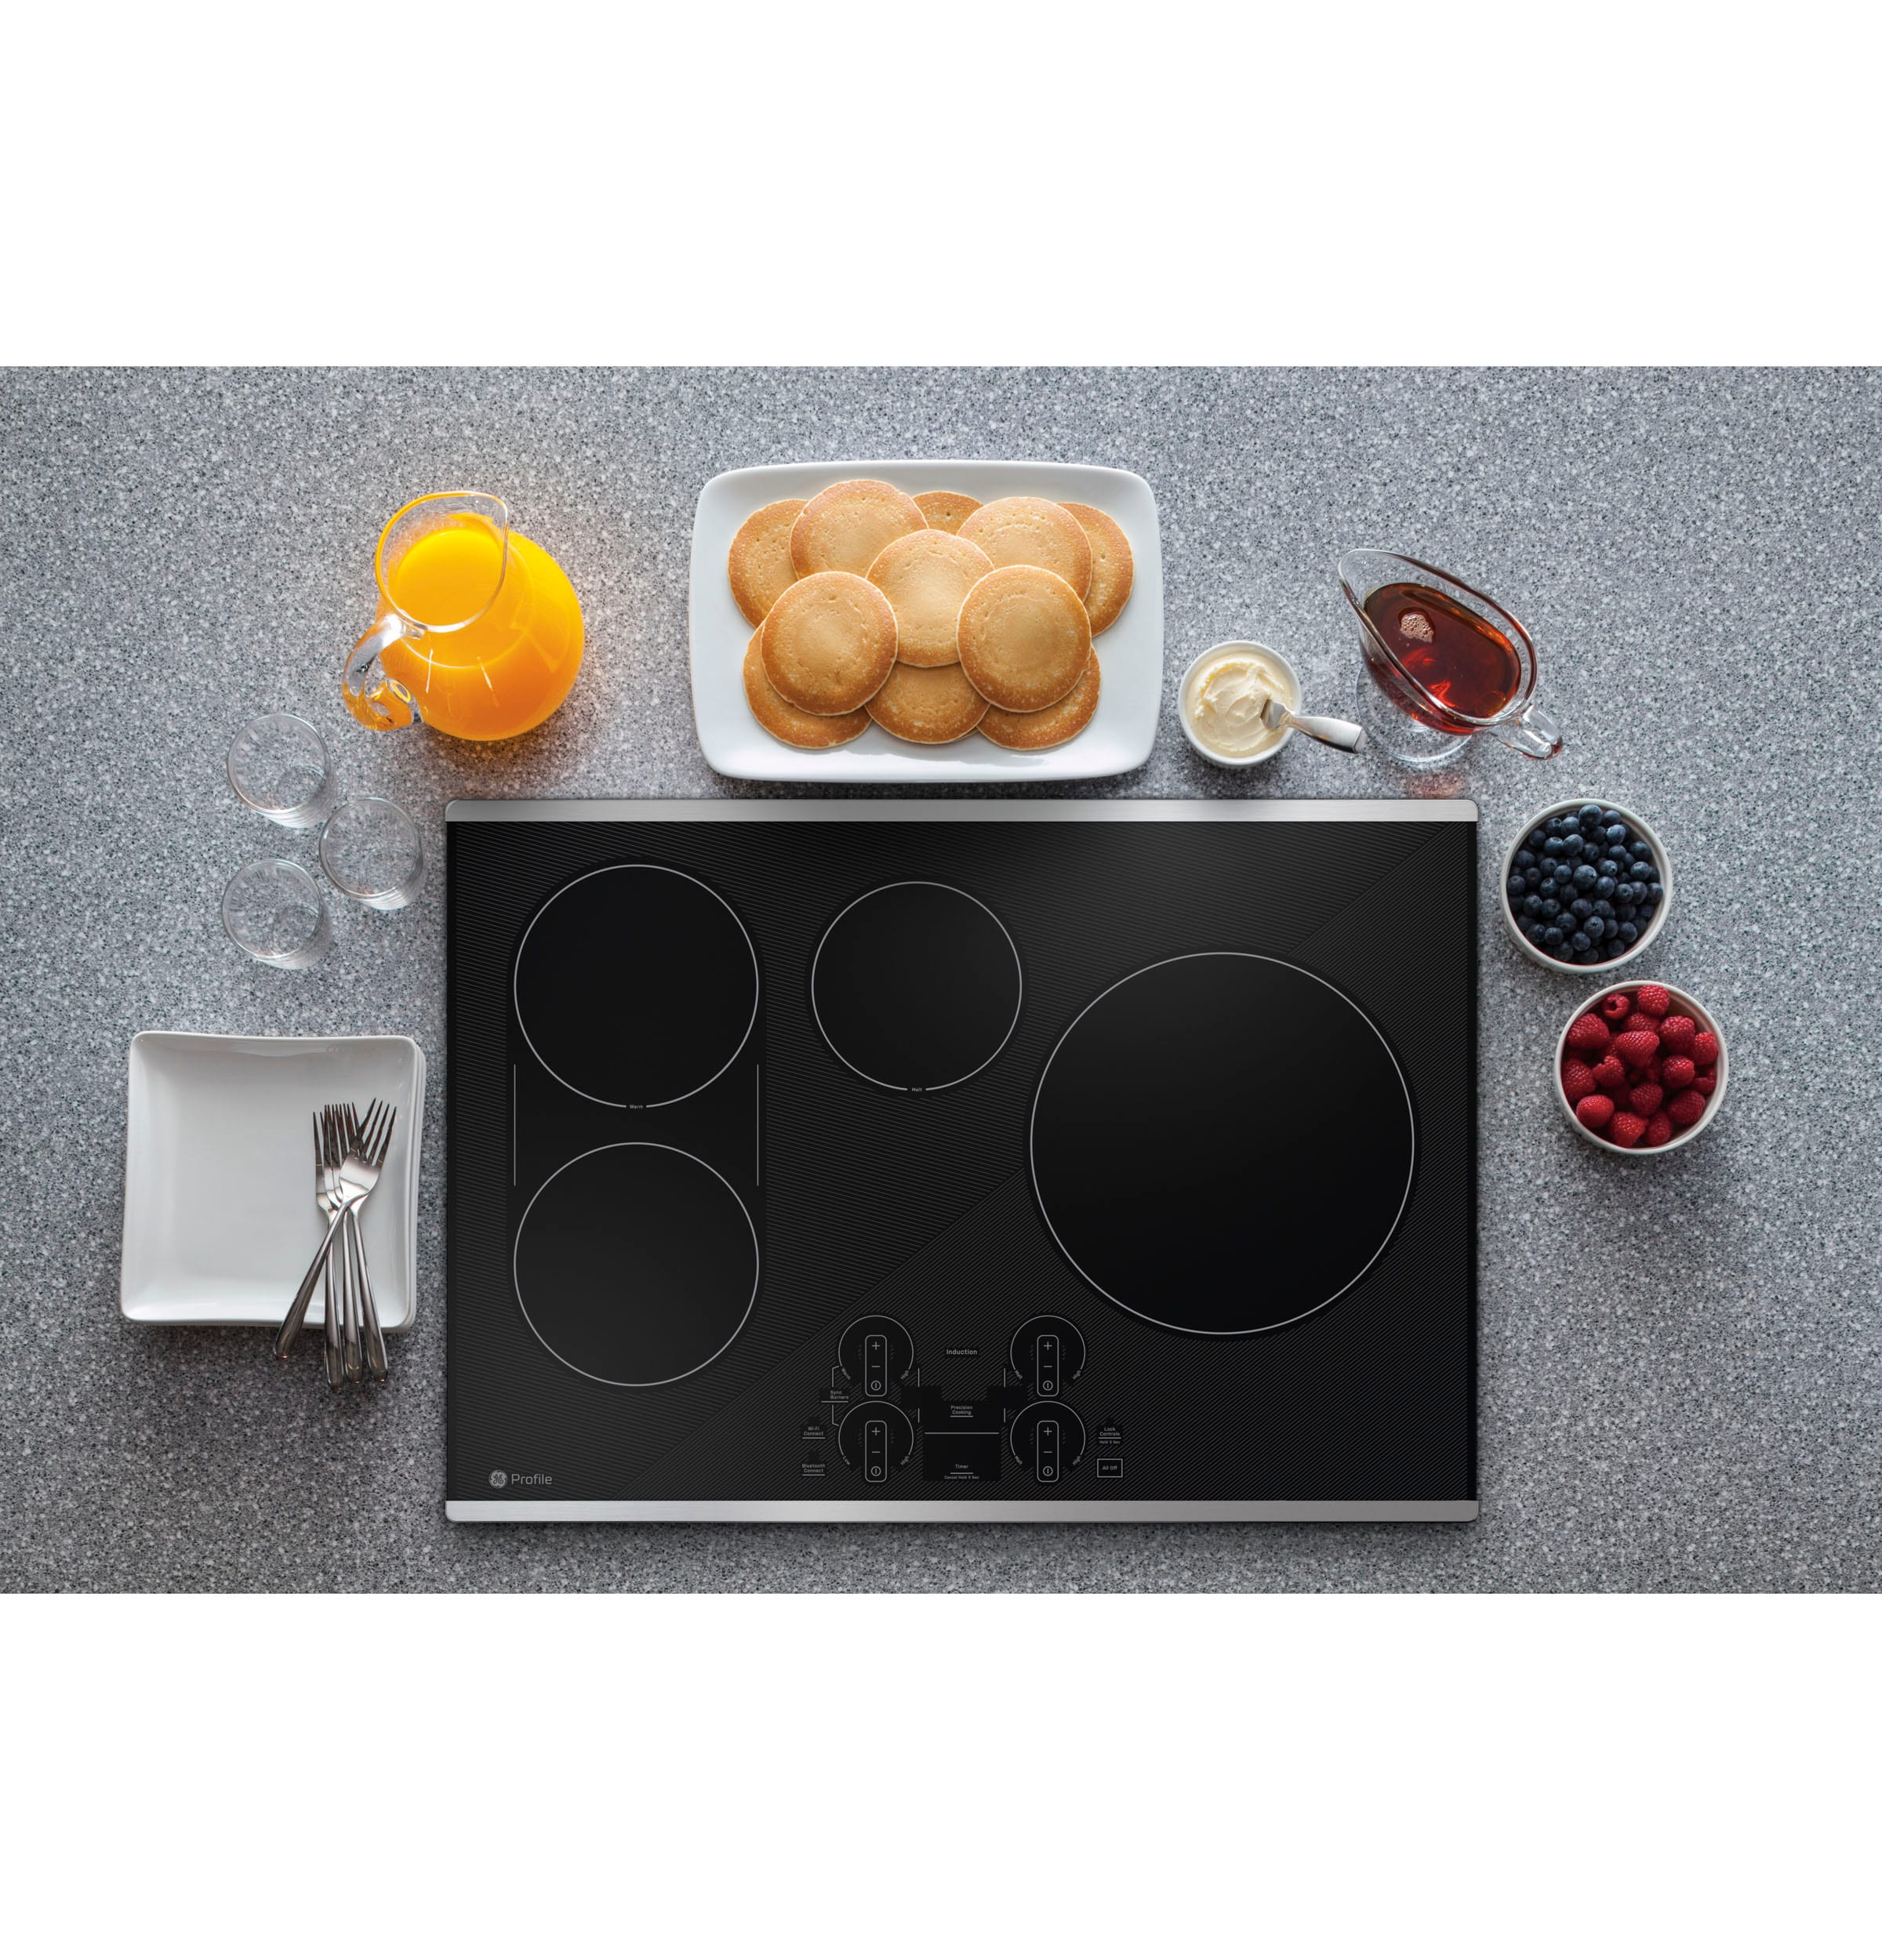 Electric Cooktop Single Burner,3500W 220V Electric Stove Top with Knob  Control,Portable Induction Cooktop with 2 Handle, Hot plate with Double  Ring Heating,Suitable for different types of POTS, 3 hours Timer